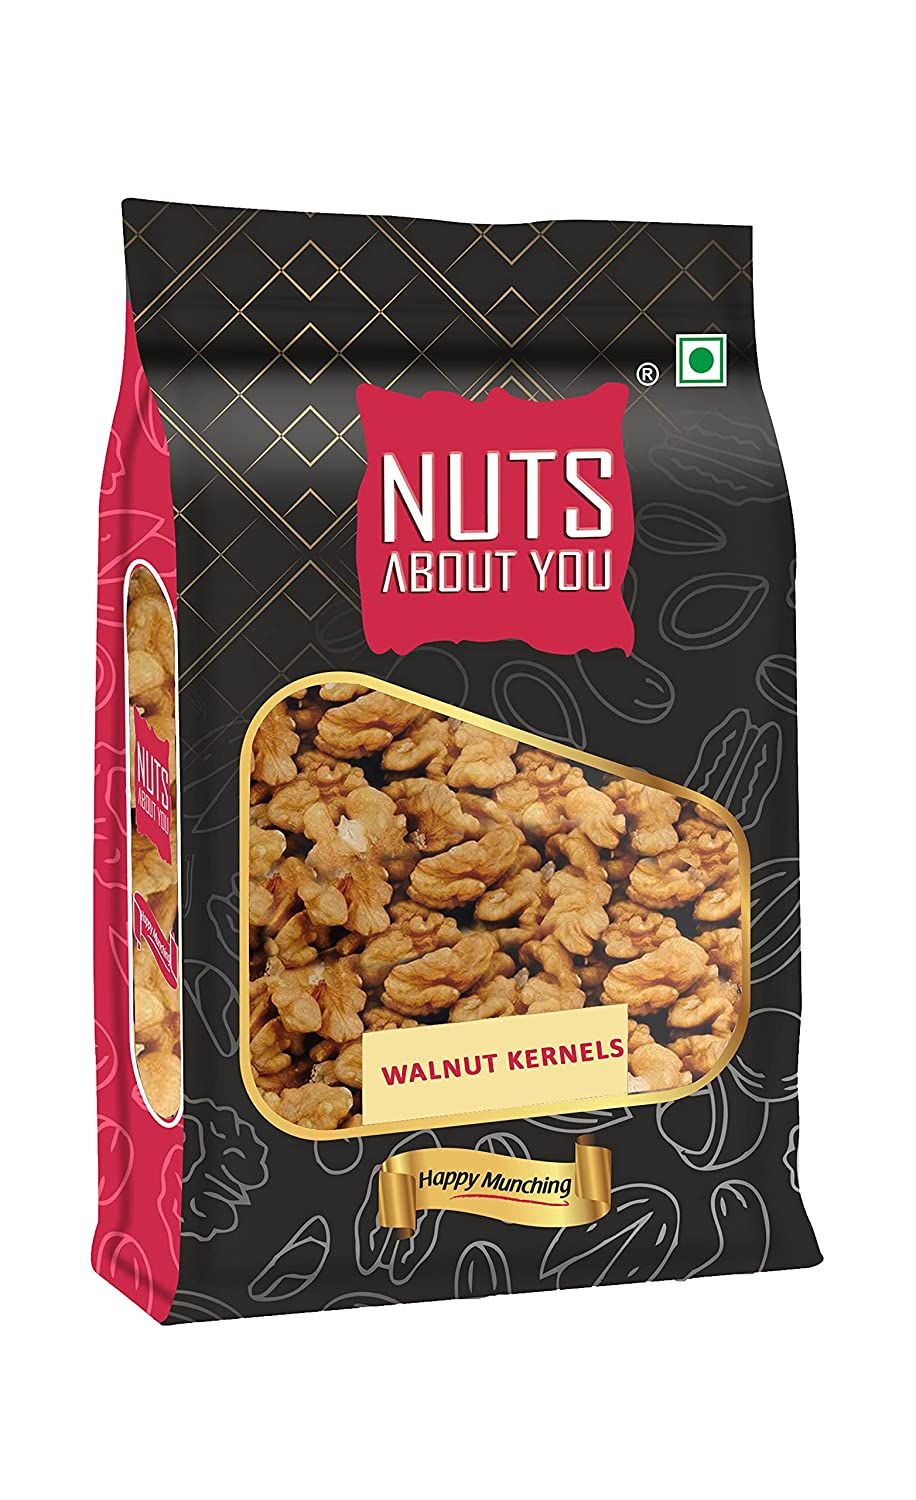 Nuts About You Walnuts Kernels Image